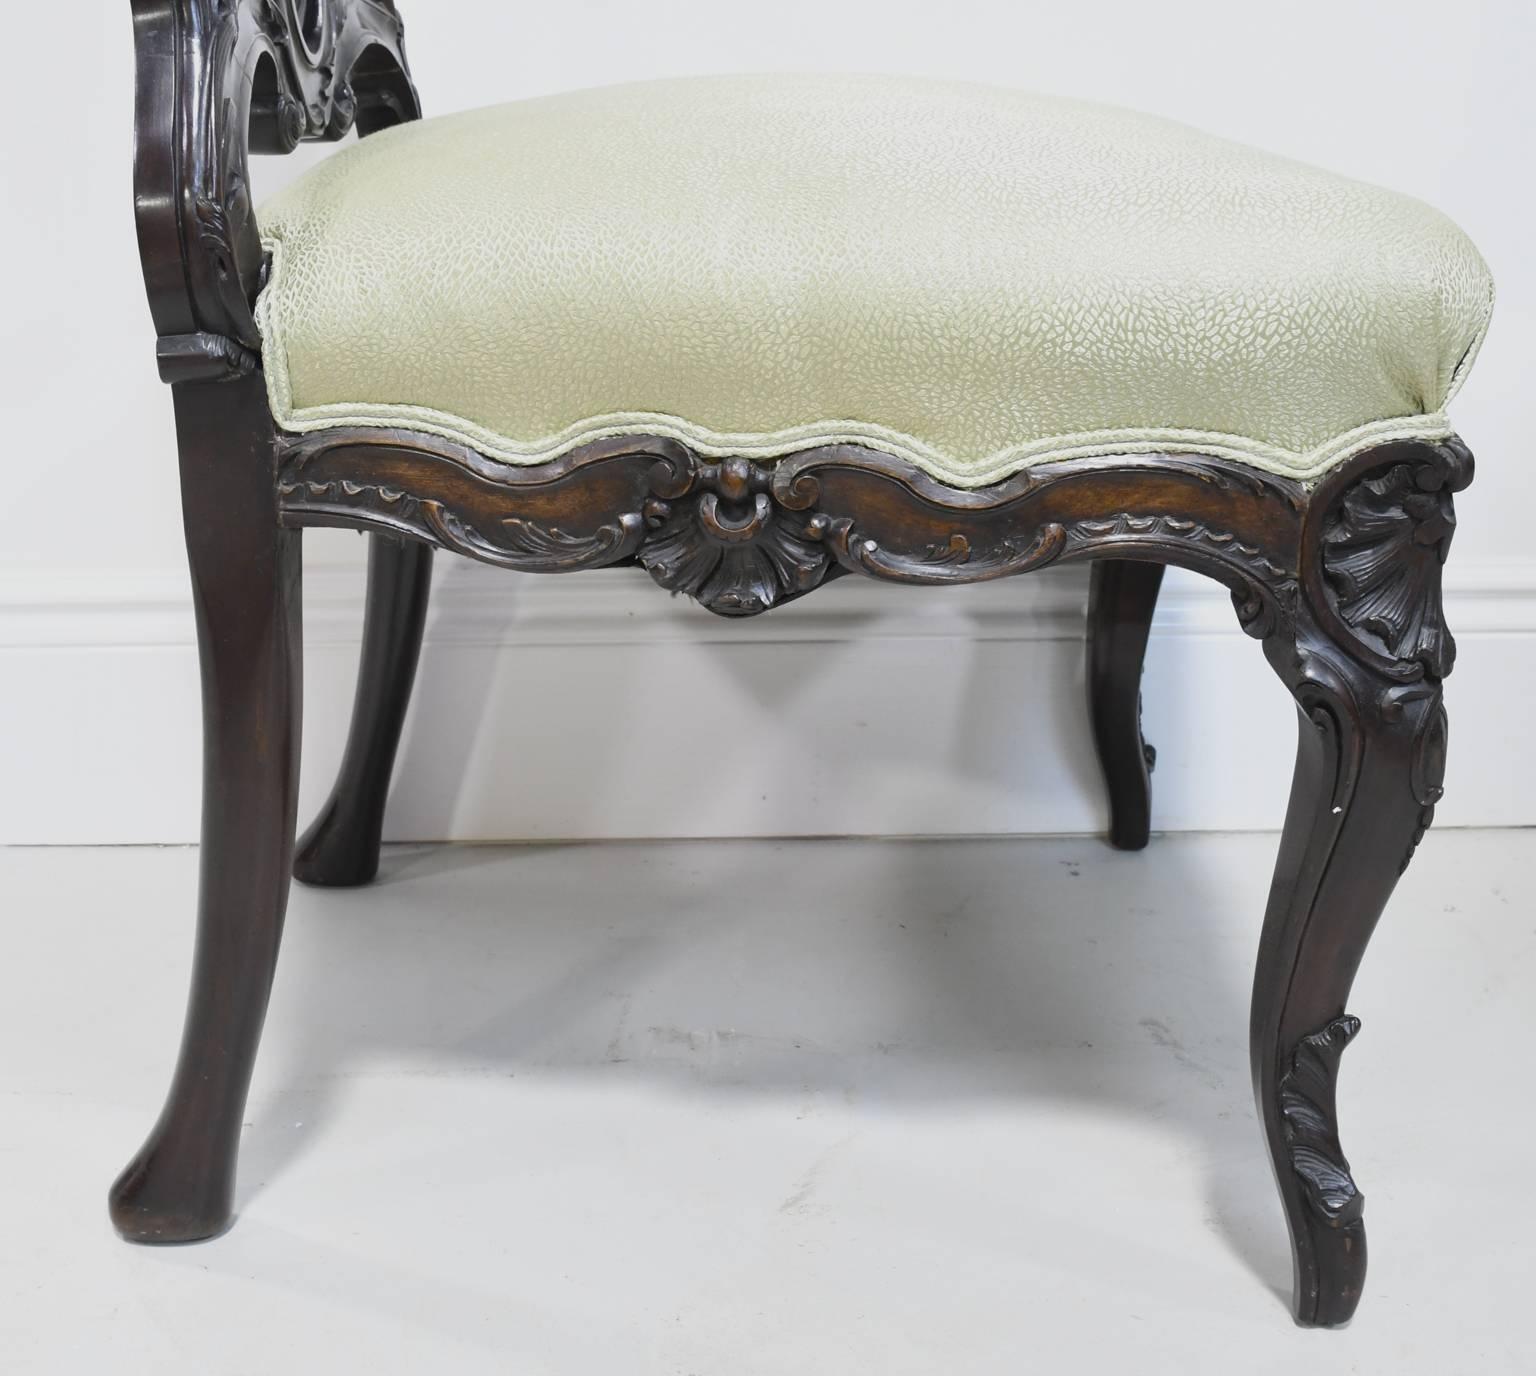 Pair of Antique American Carved Rococo Revival Chairs in Mahogany w/ Upholstery In Good Condition For Sale In Miami, FL